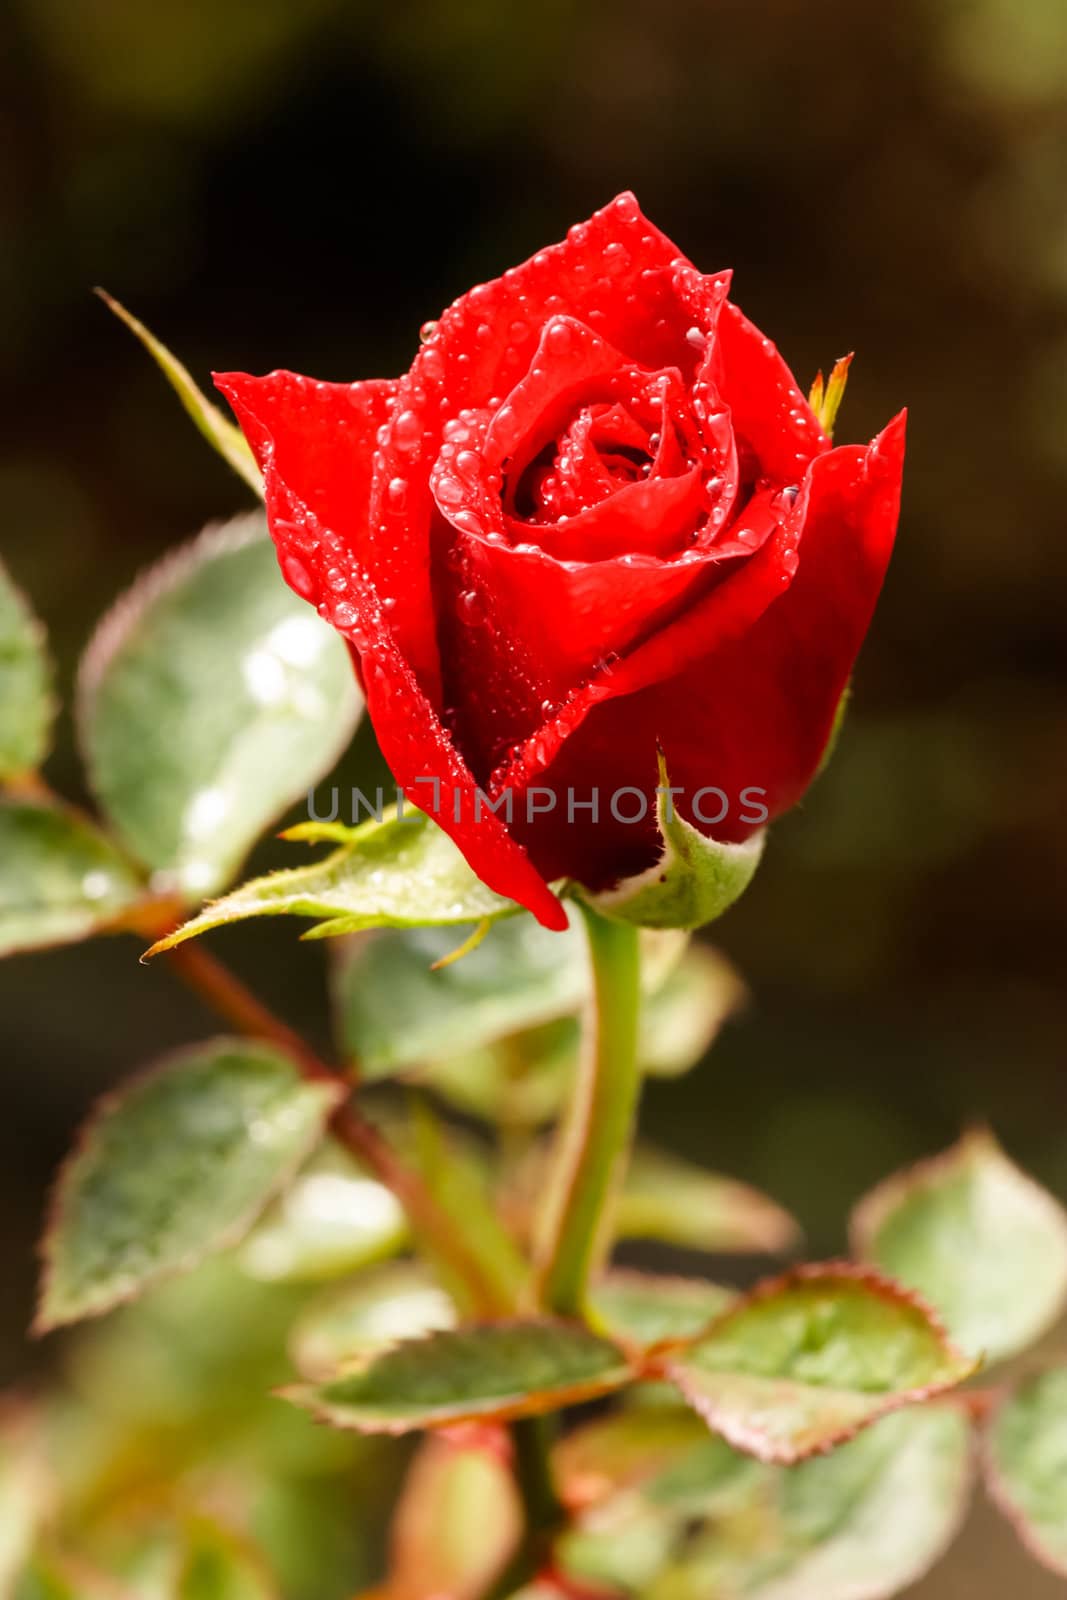 Beautiful red rose with water drops by jame_j@homail.com